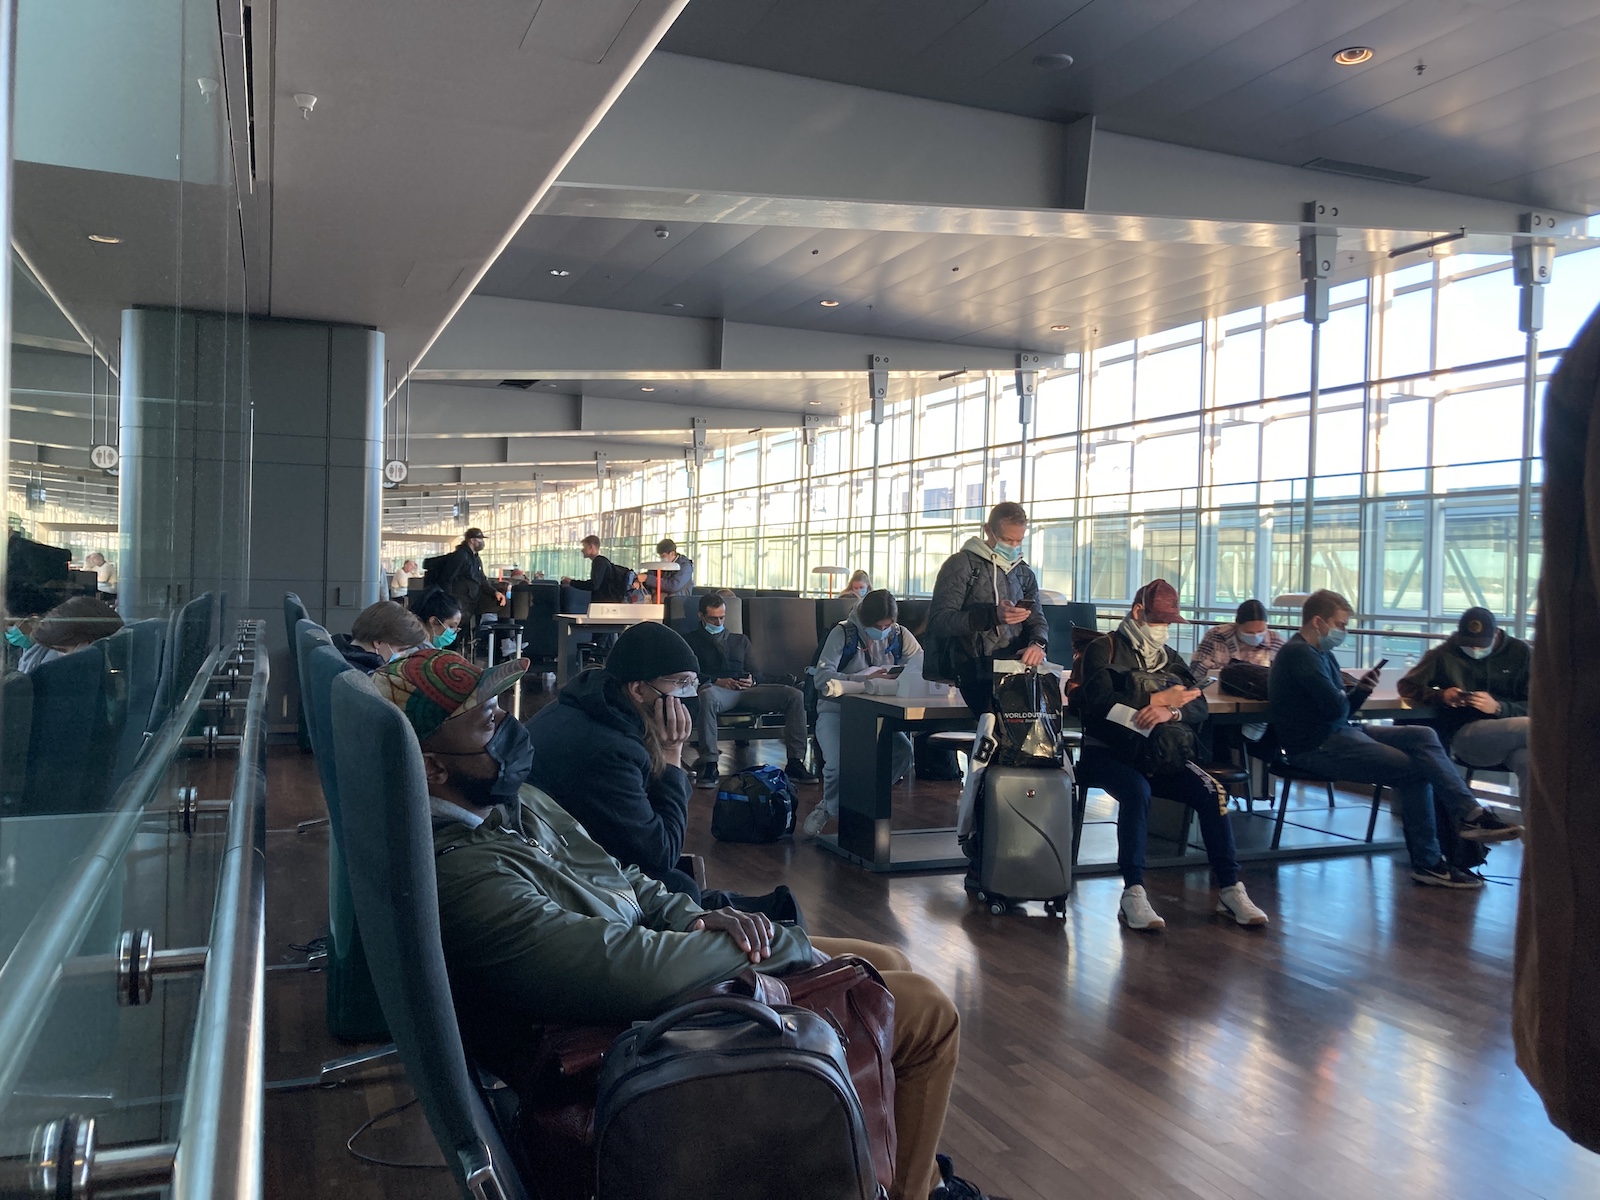 Image of waiting area with unorganized boarding line